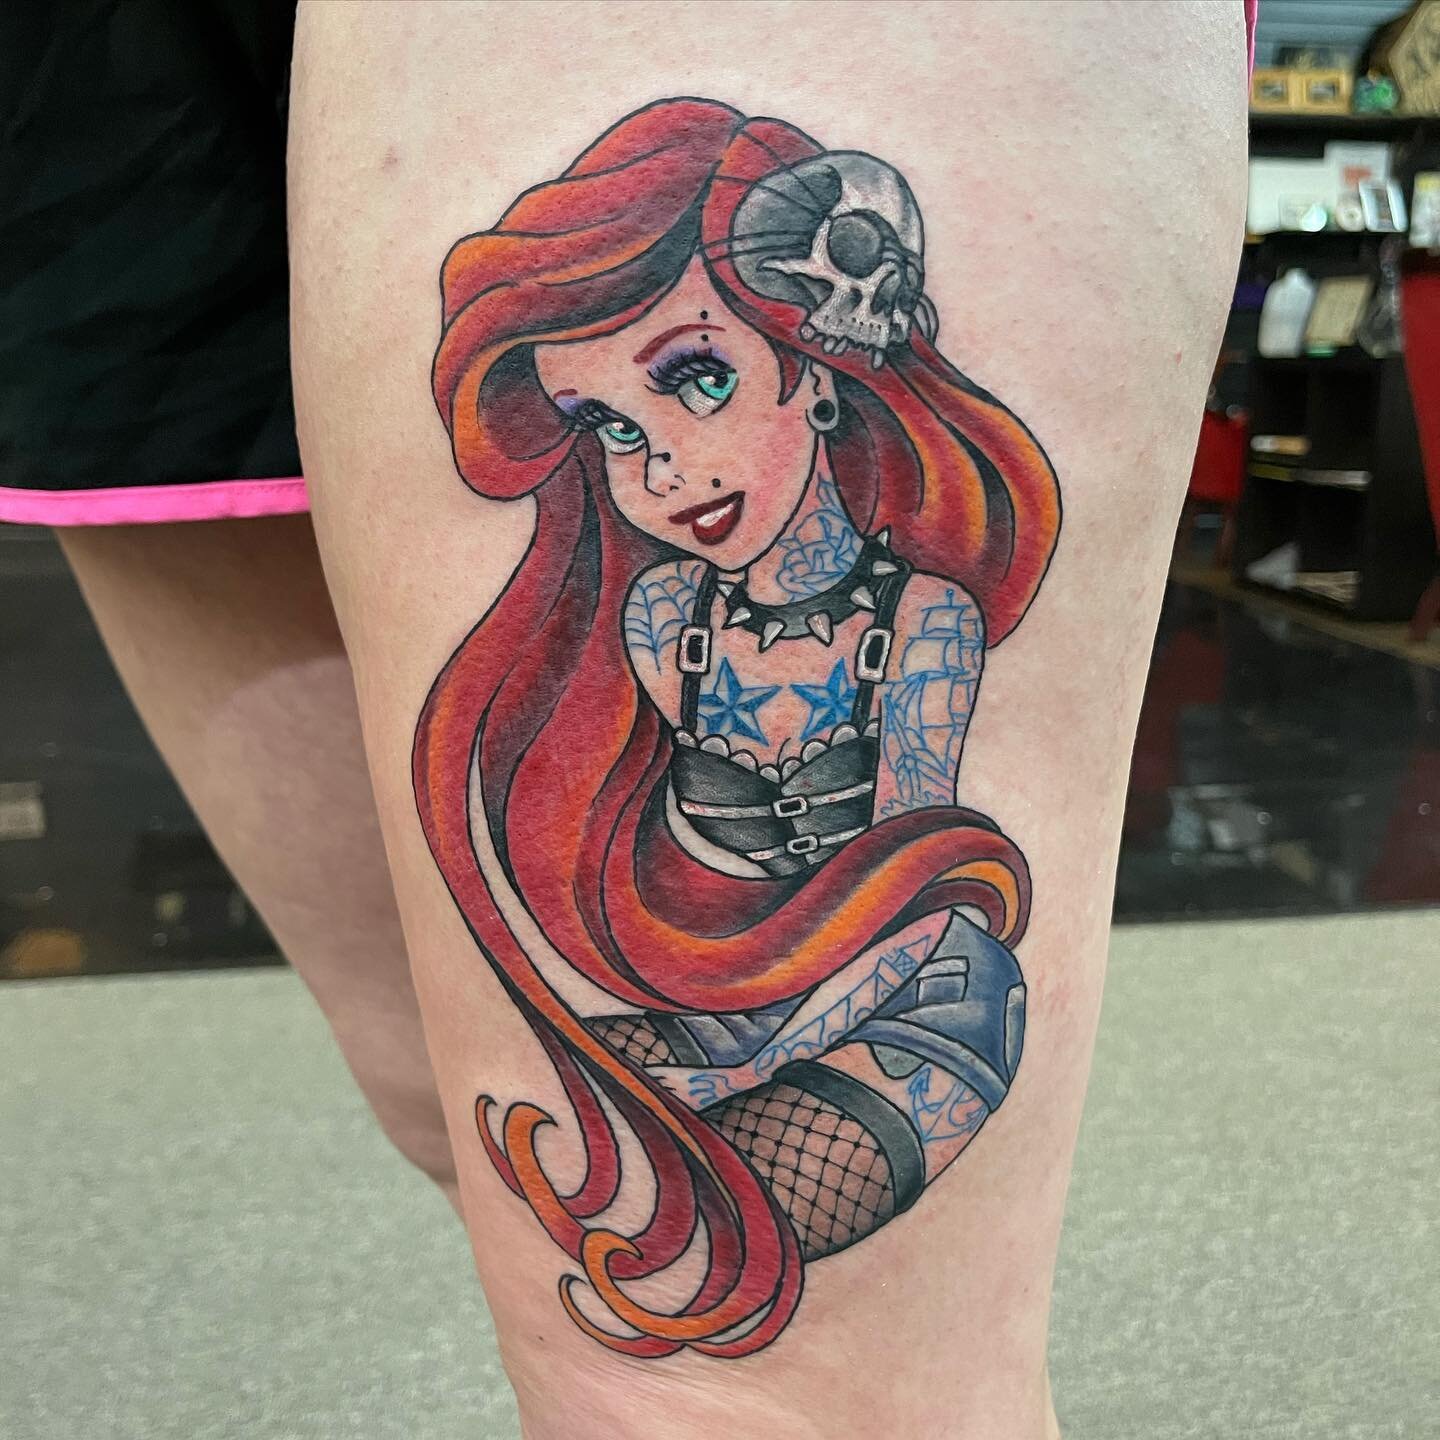 Love love love doing these Disney punk tattoos! I&rsquo;m a bit back logged so a bunch of things will be coming through thanks for looking ✍️✌️😁 #disney #disneypunk #punk #punktattoo #disneytattoo #punkprincess #girlswithtattoos #colortattoo #tattoo